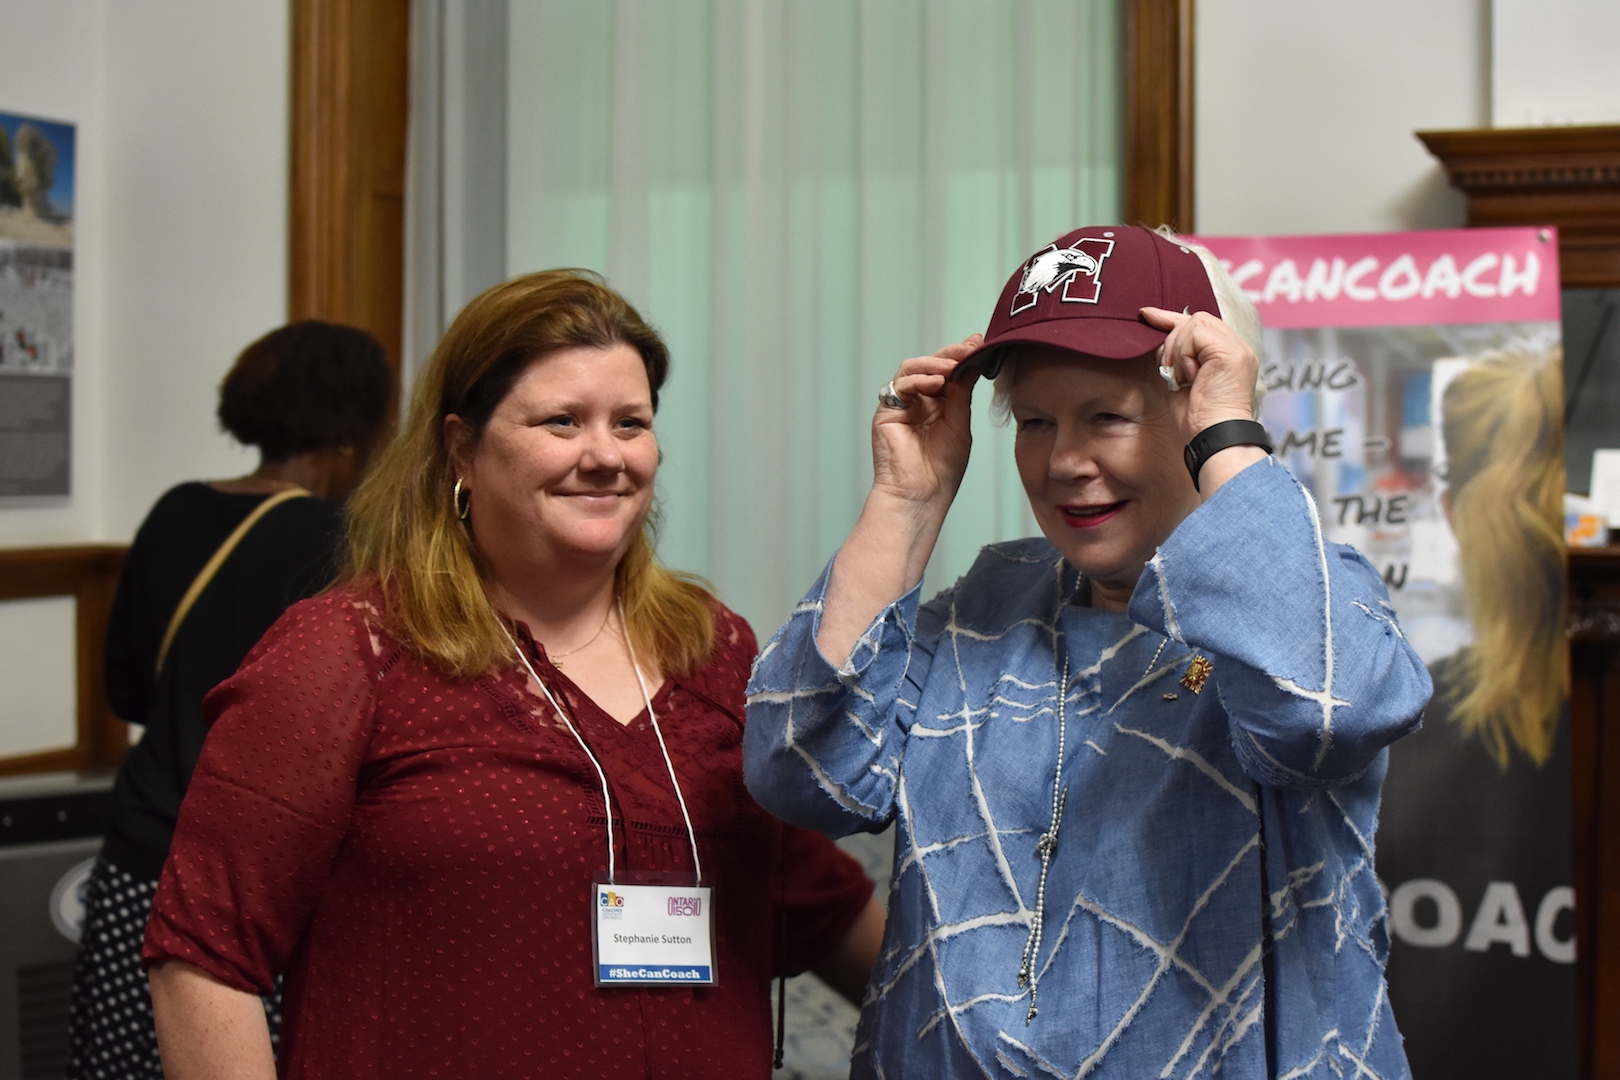 The Lieutenant Governor and Stephanie Sutton, a softball coach at McMaster University and coach mentor, share a light moment.